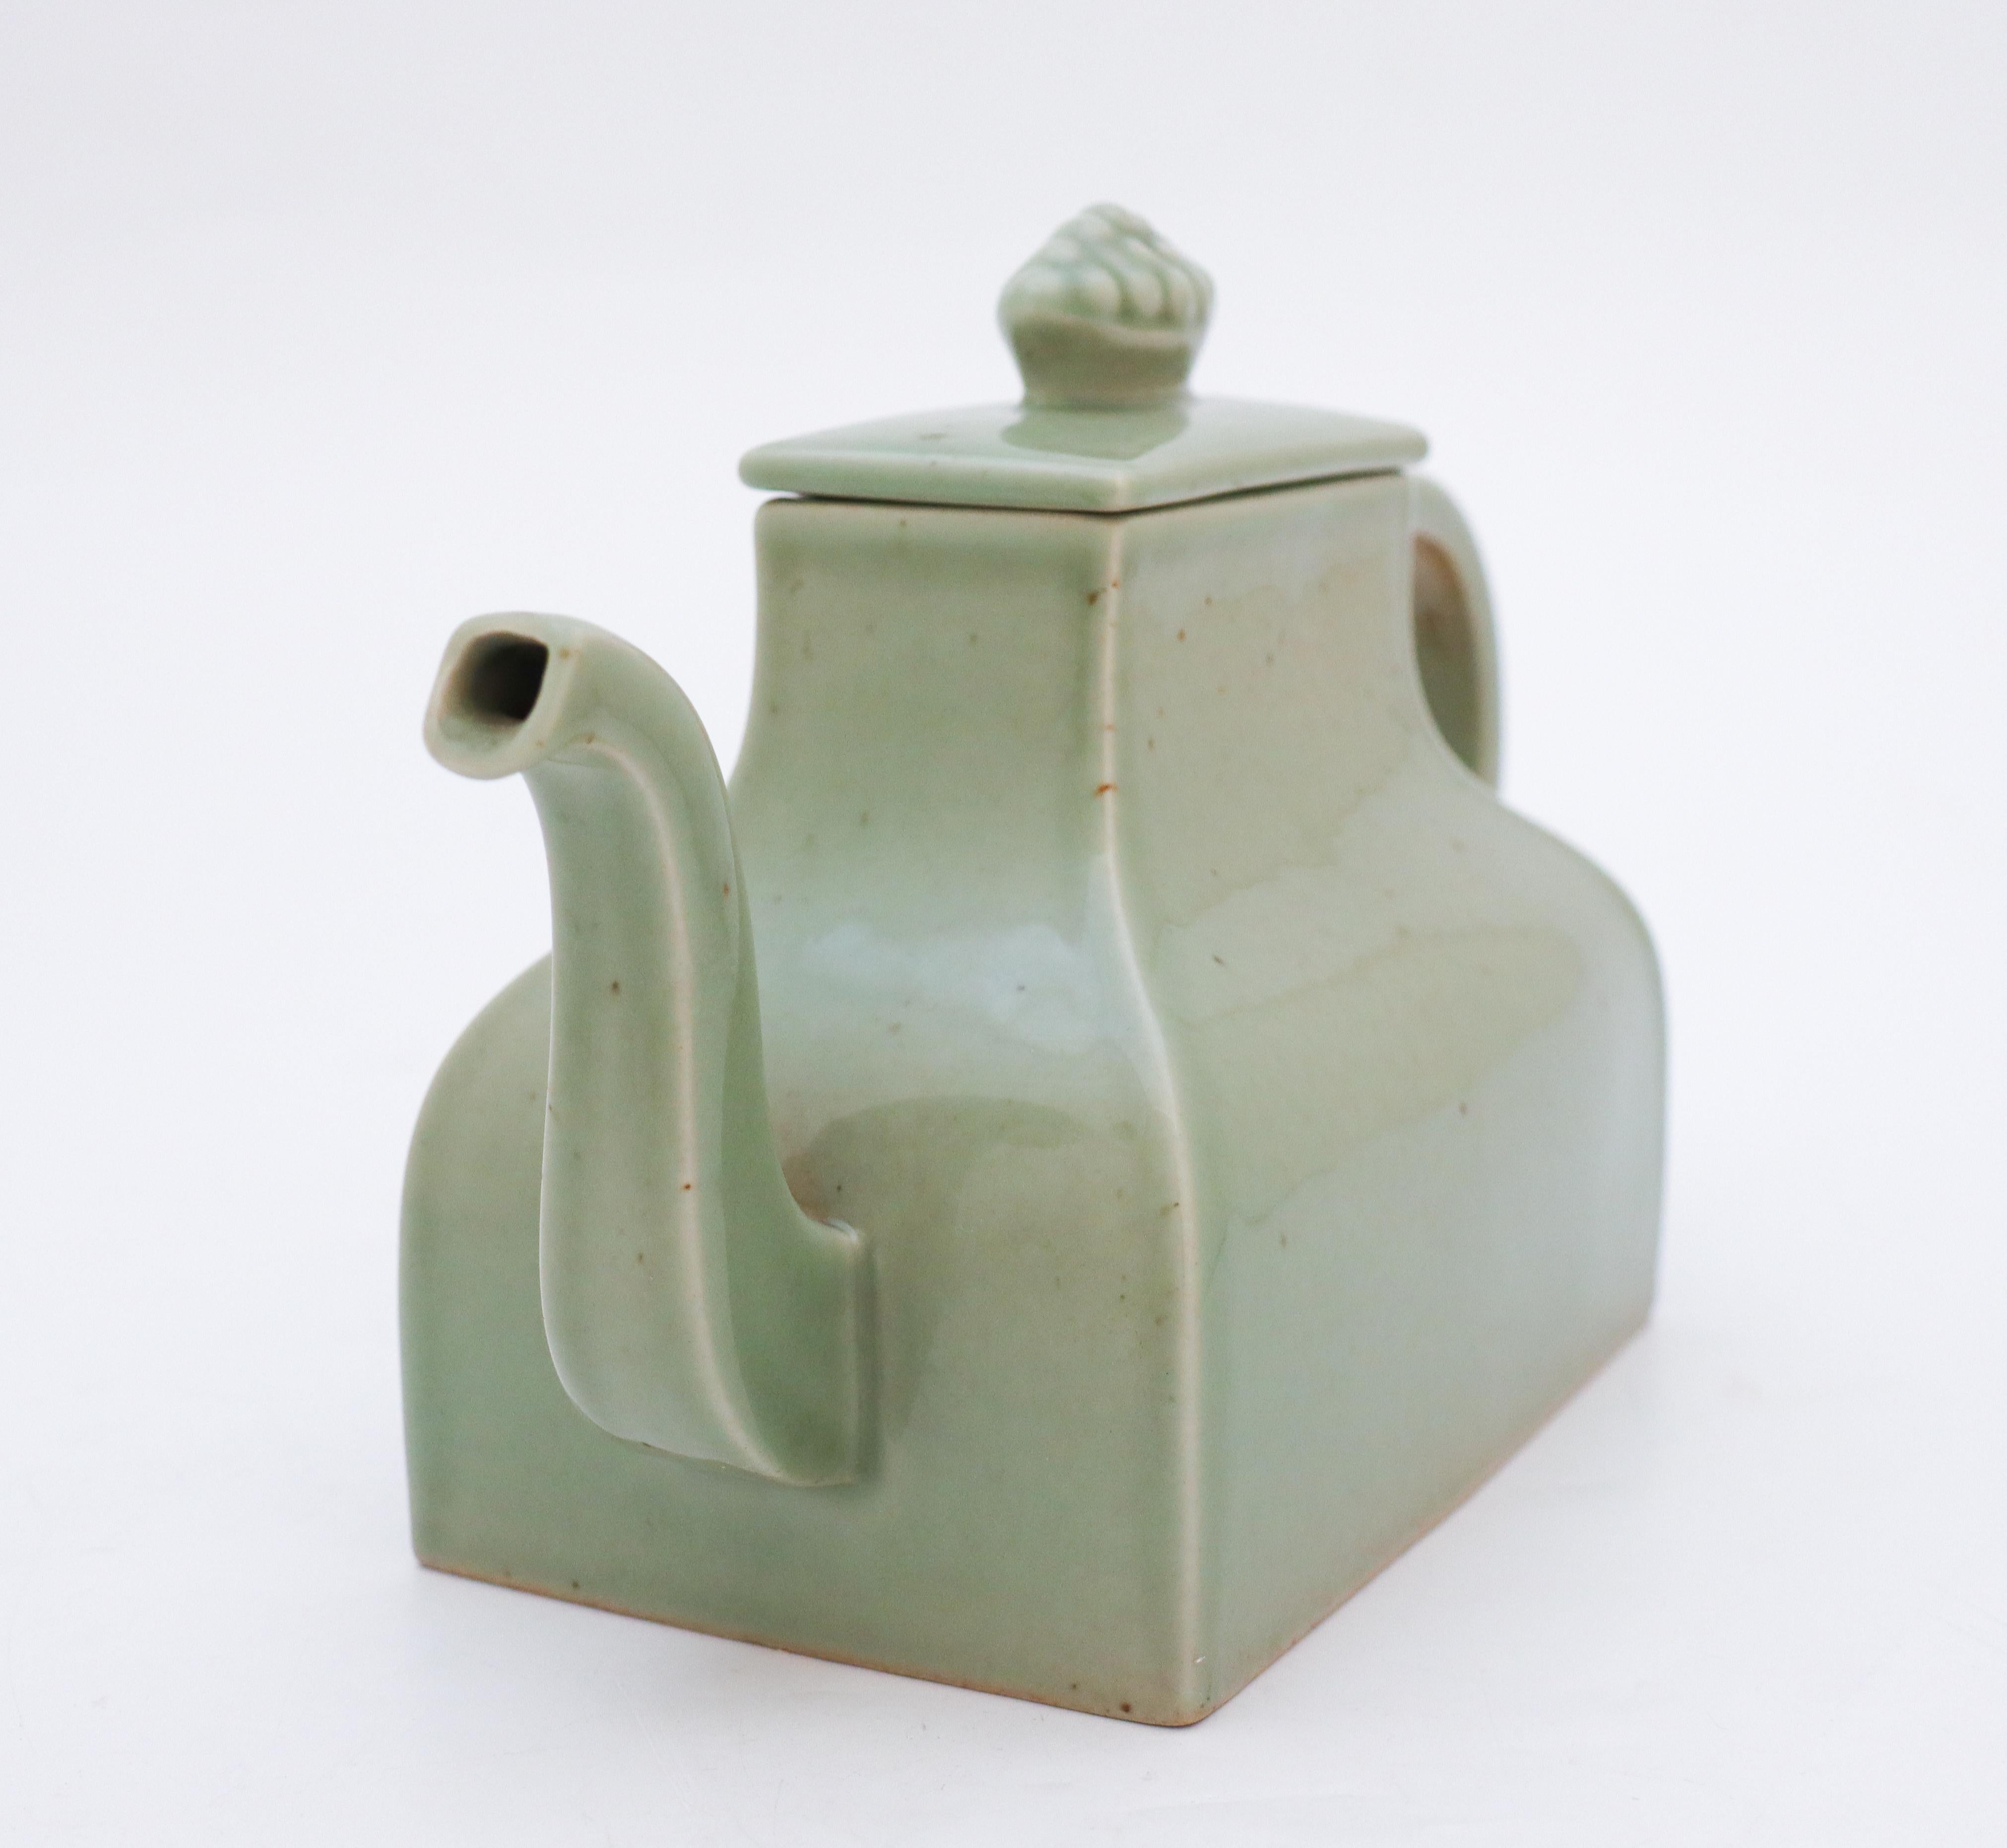 Late 20th Century Teapot with Green Celadon Glaze Signe Persson Melin, Rörstrand, Vintage